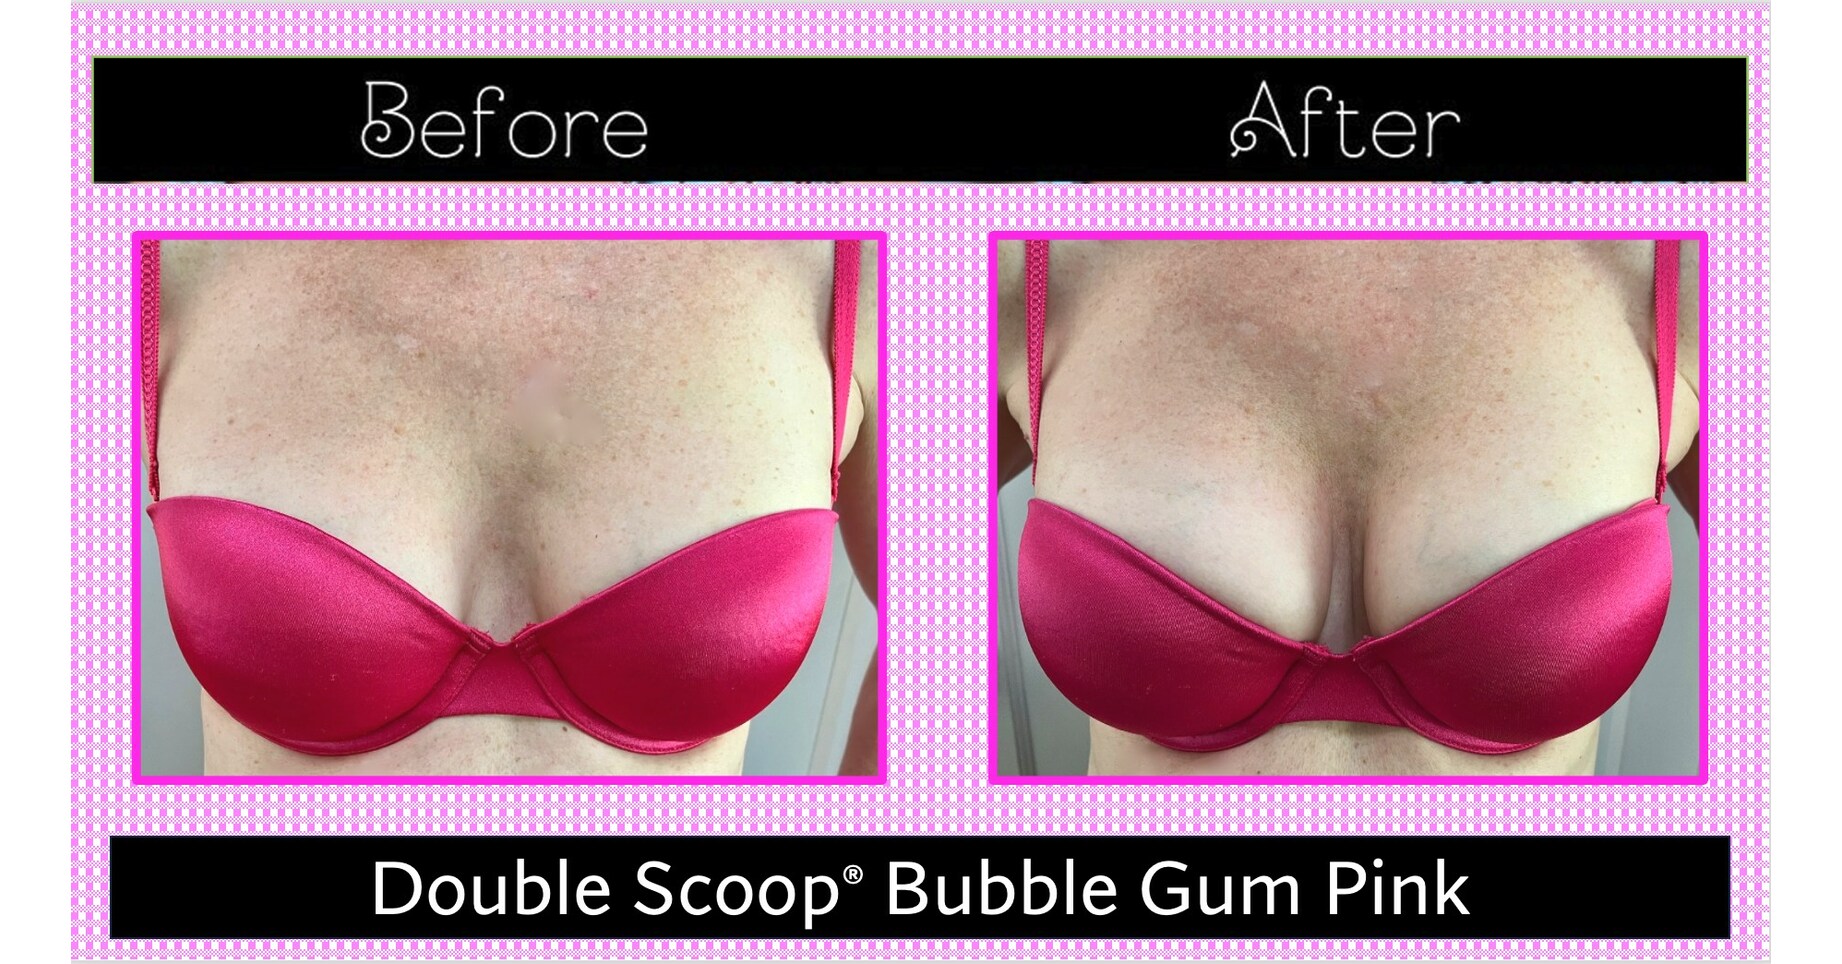 Shapewear Company Double Scoop Announces its Latest Color, Bubble Gum Pink,  Just in Time for Halloween's Hottest Costume